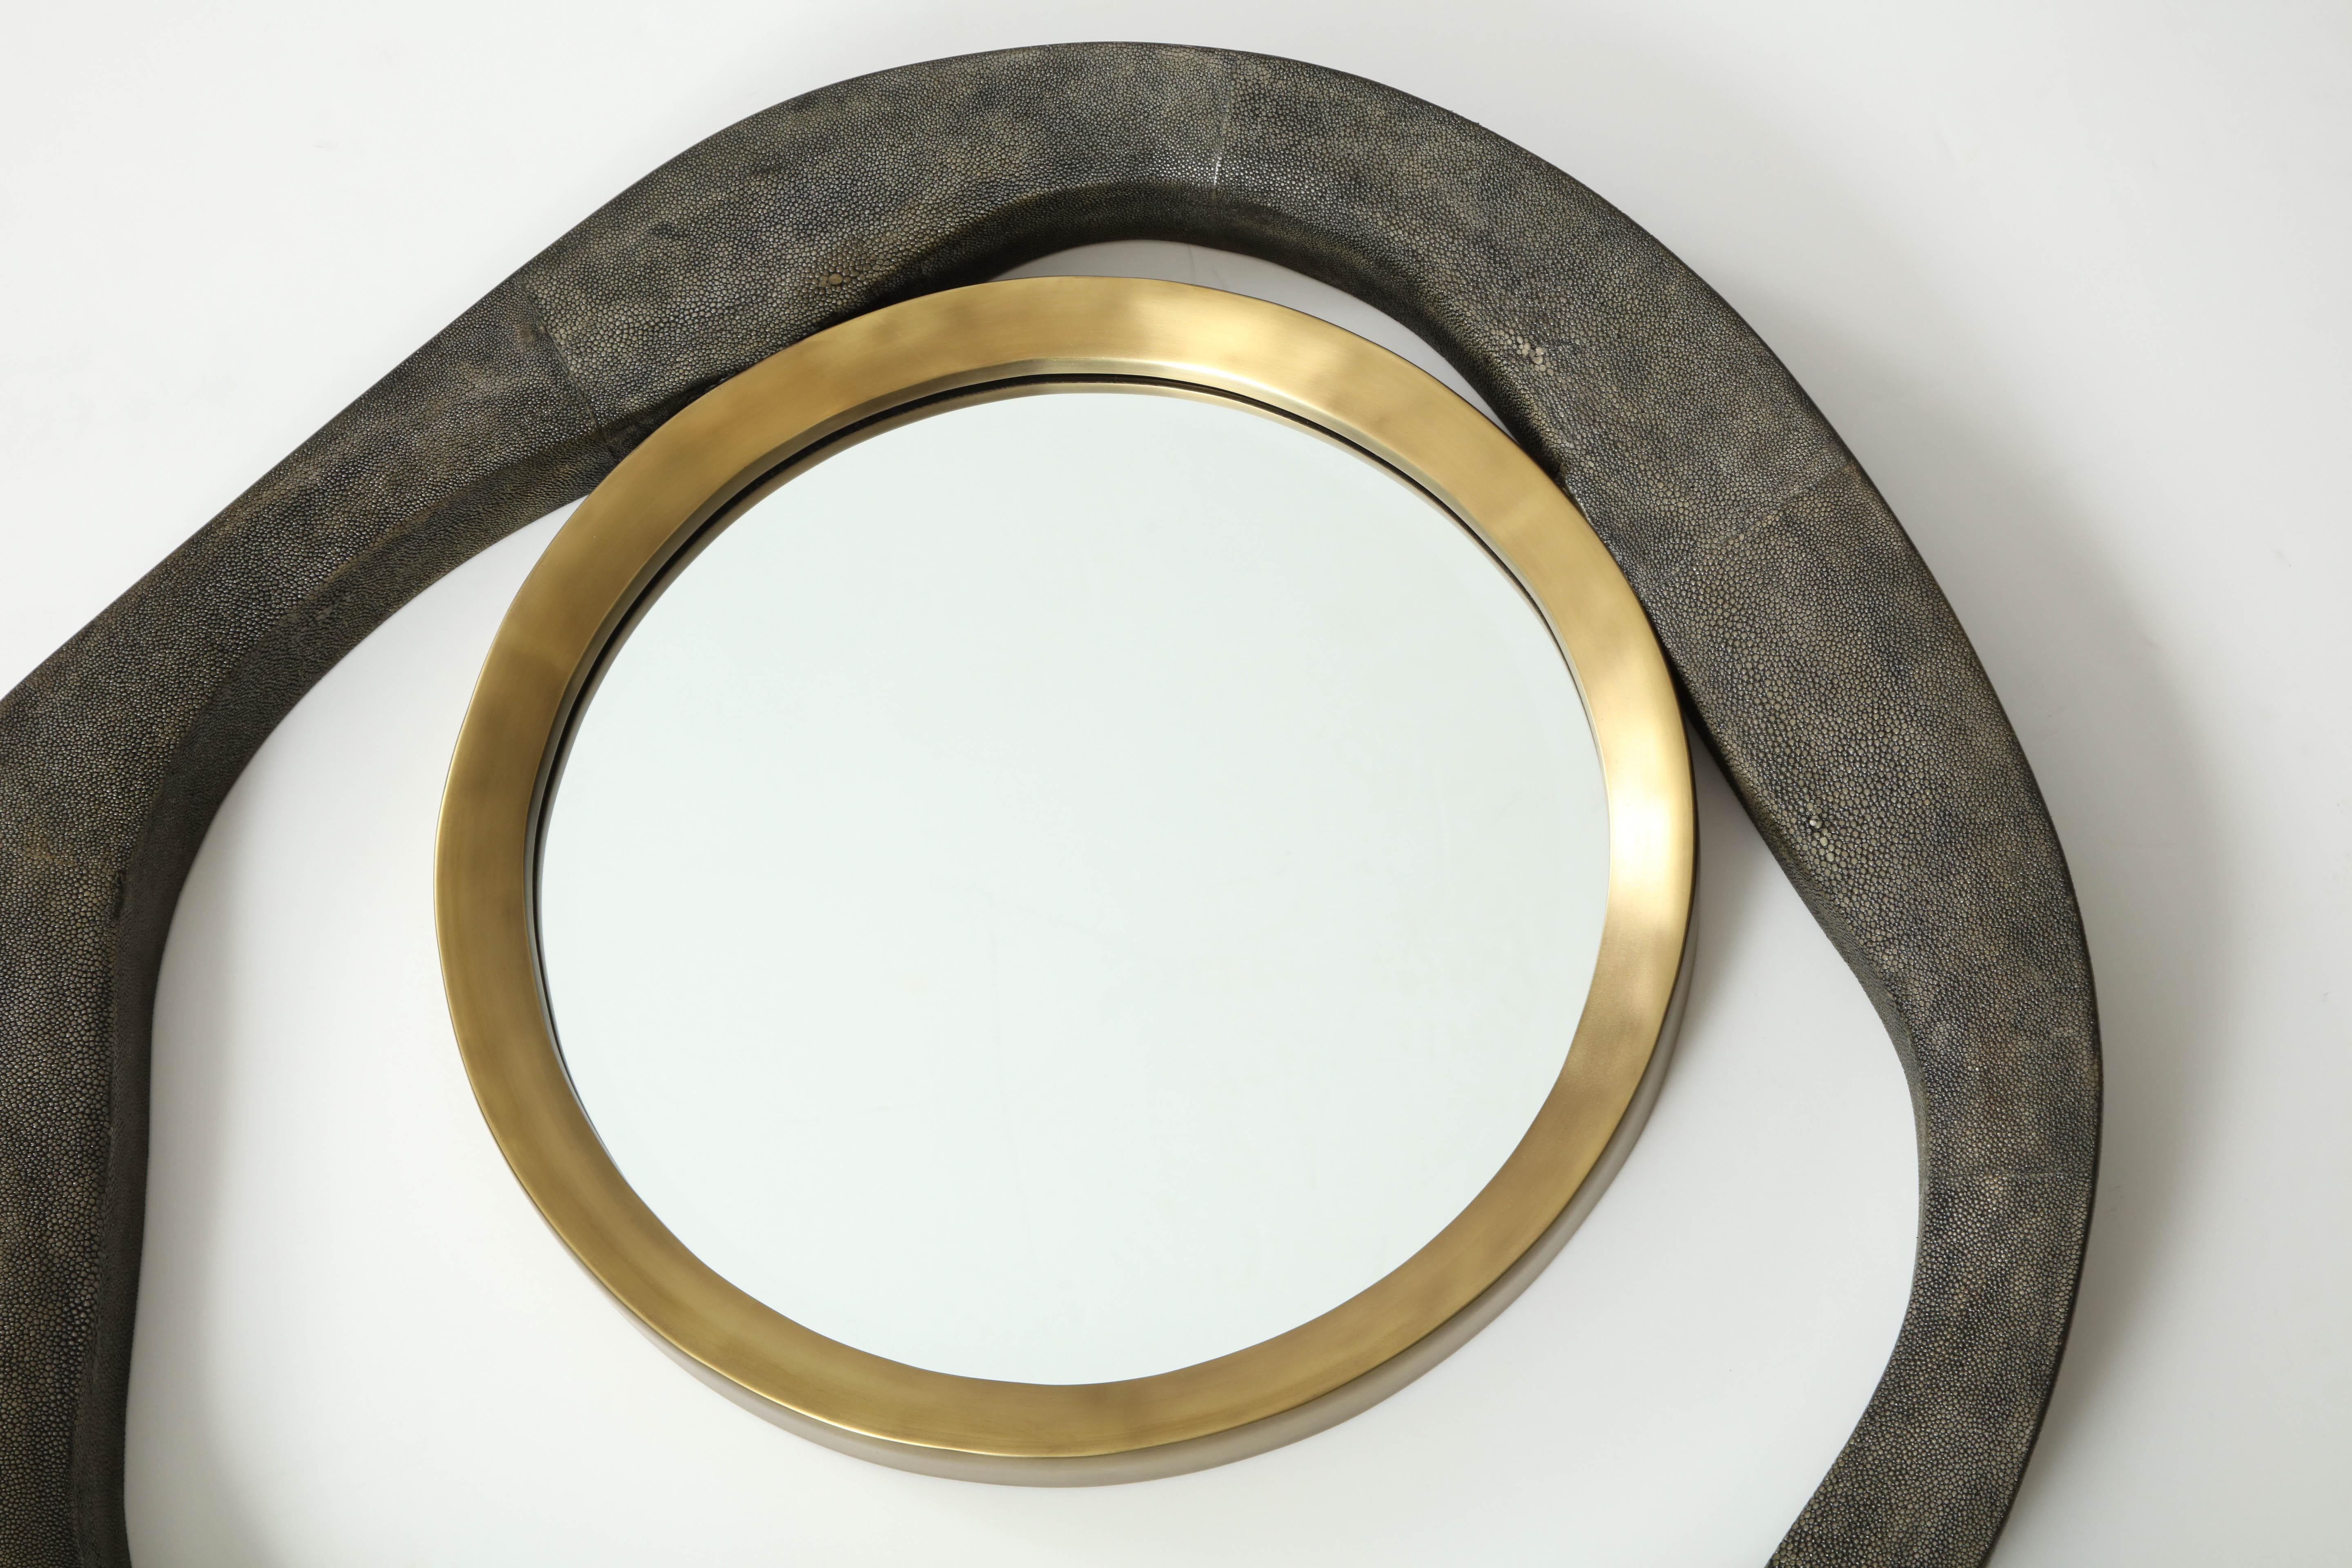 Hand-Crafted Mirror, Shagreen, Black Color with Brass Details, Contemporary, Organic Shape